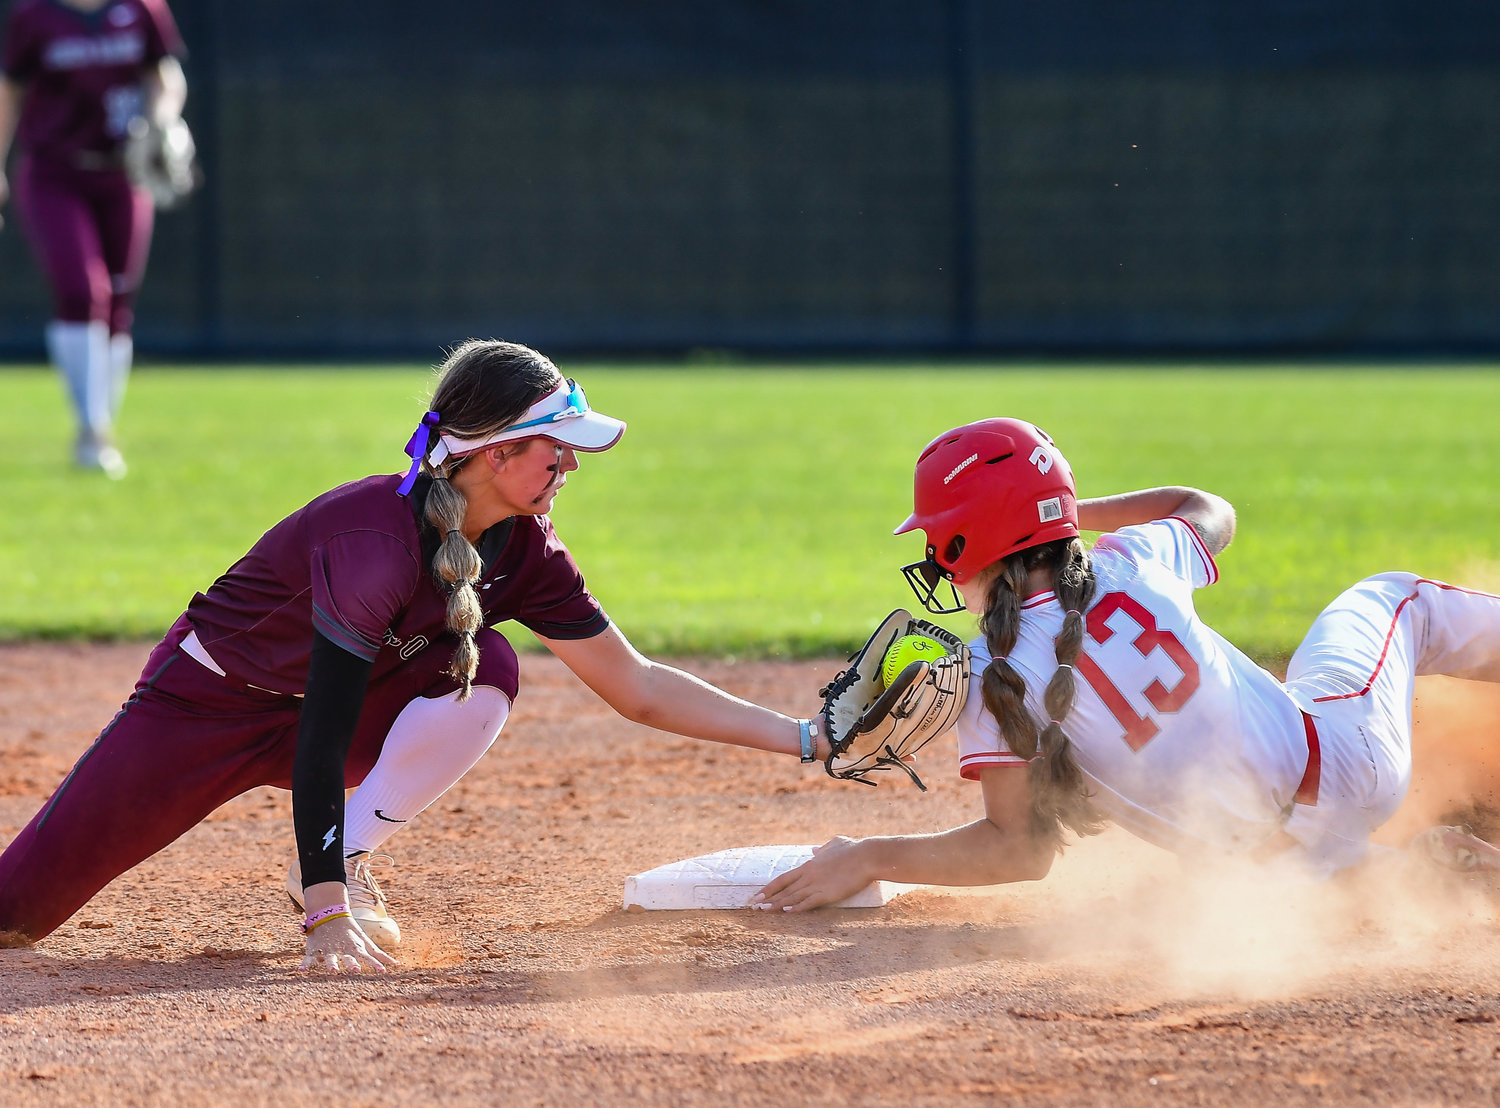 May 13, 2022: Katy's Kailey Wyckoff #13 slides safely into second base during the first inning of the Regional Quarterfinal playoff between Katy and Cinco Ranch at Katy HS. (Photo by Mark Goodman / Katy Times)